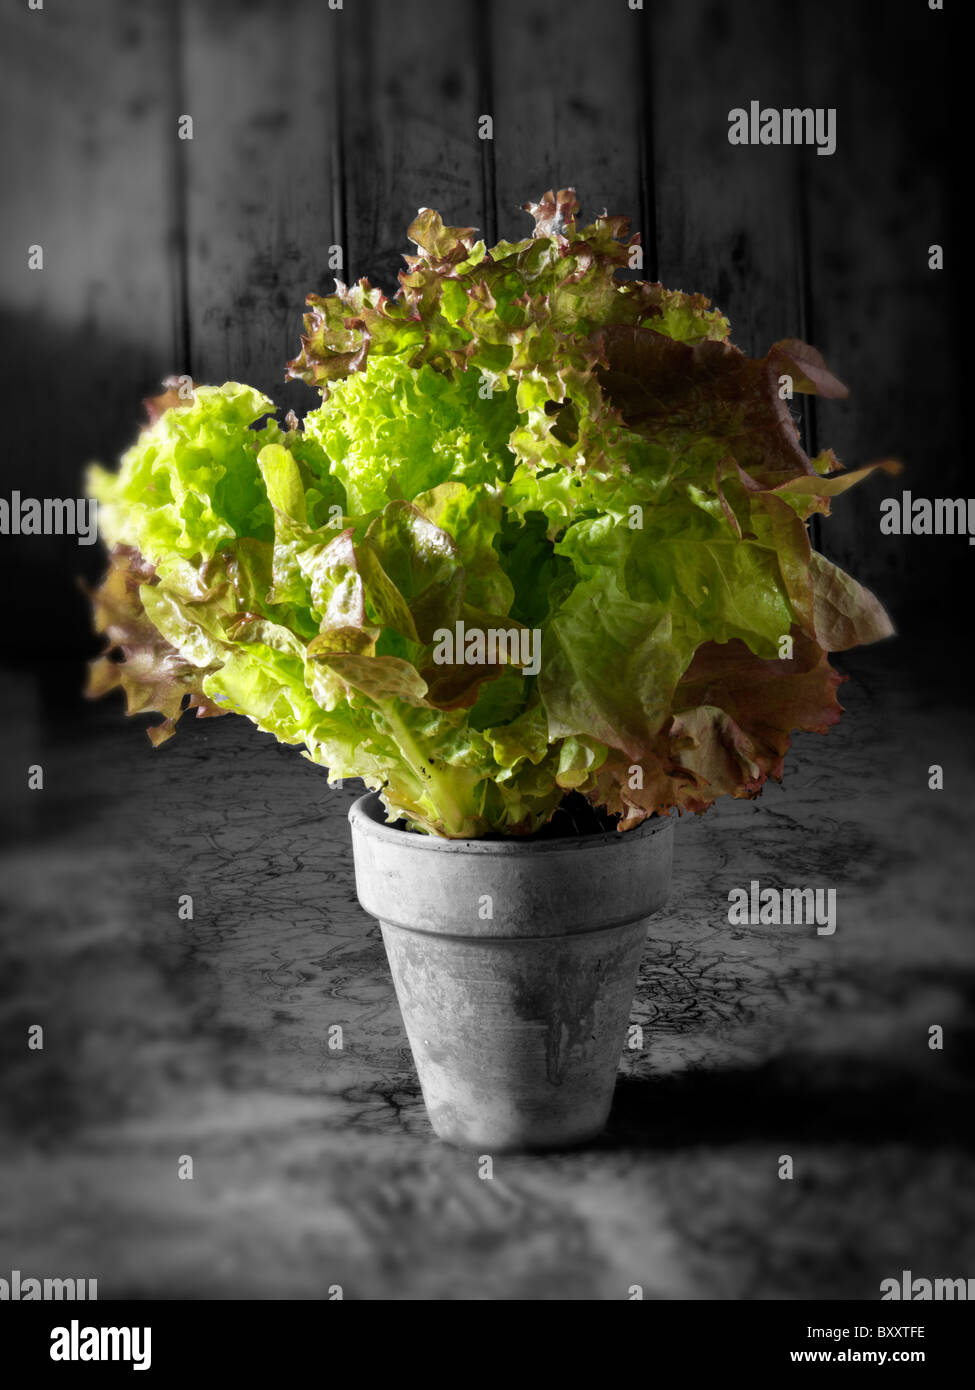 Close up of Lollo Rosso lettuce growing in a terracotta pot in a kitchen Stock Photo